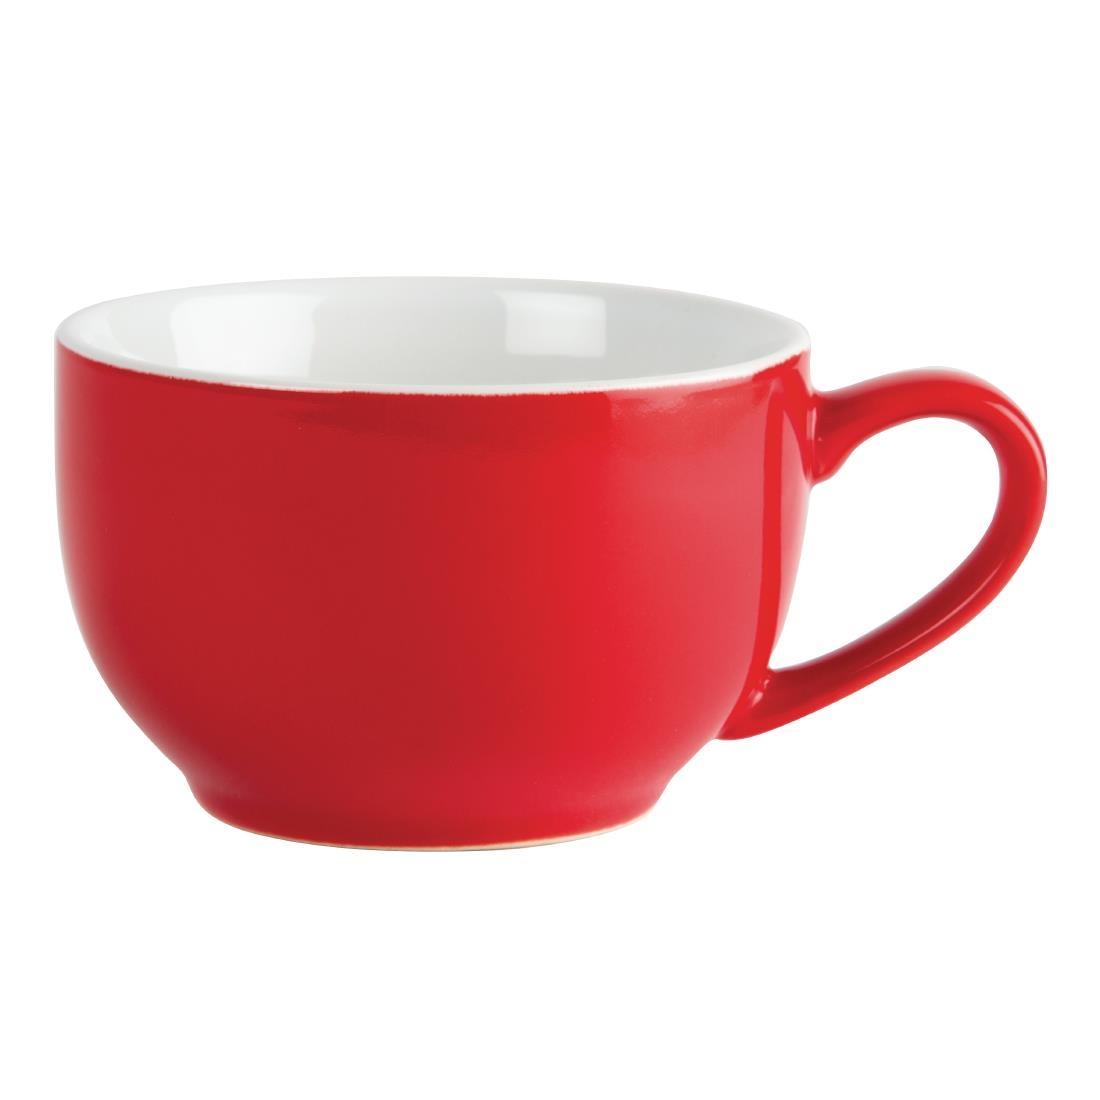 Olympia Cafe Coffee Cups Red 228ml (Pack of 12) - GK073  - 5